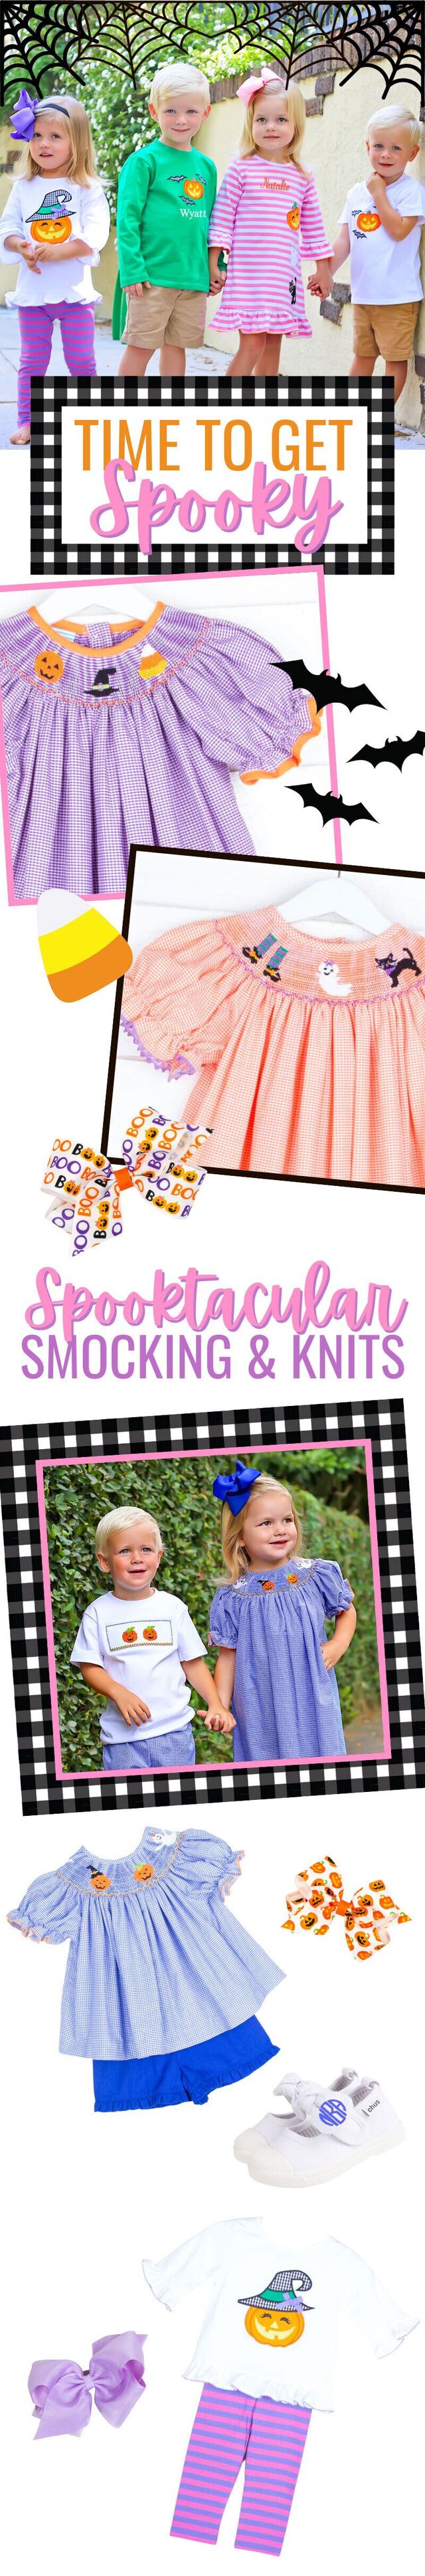 Time to get Spooky! Shop Spooktacular Smocking & Knits!  